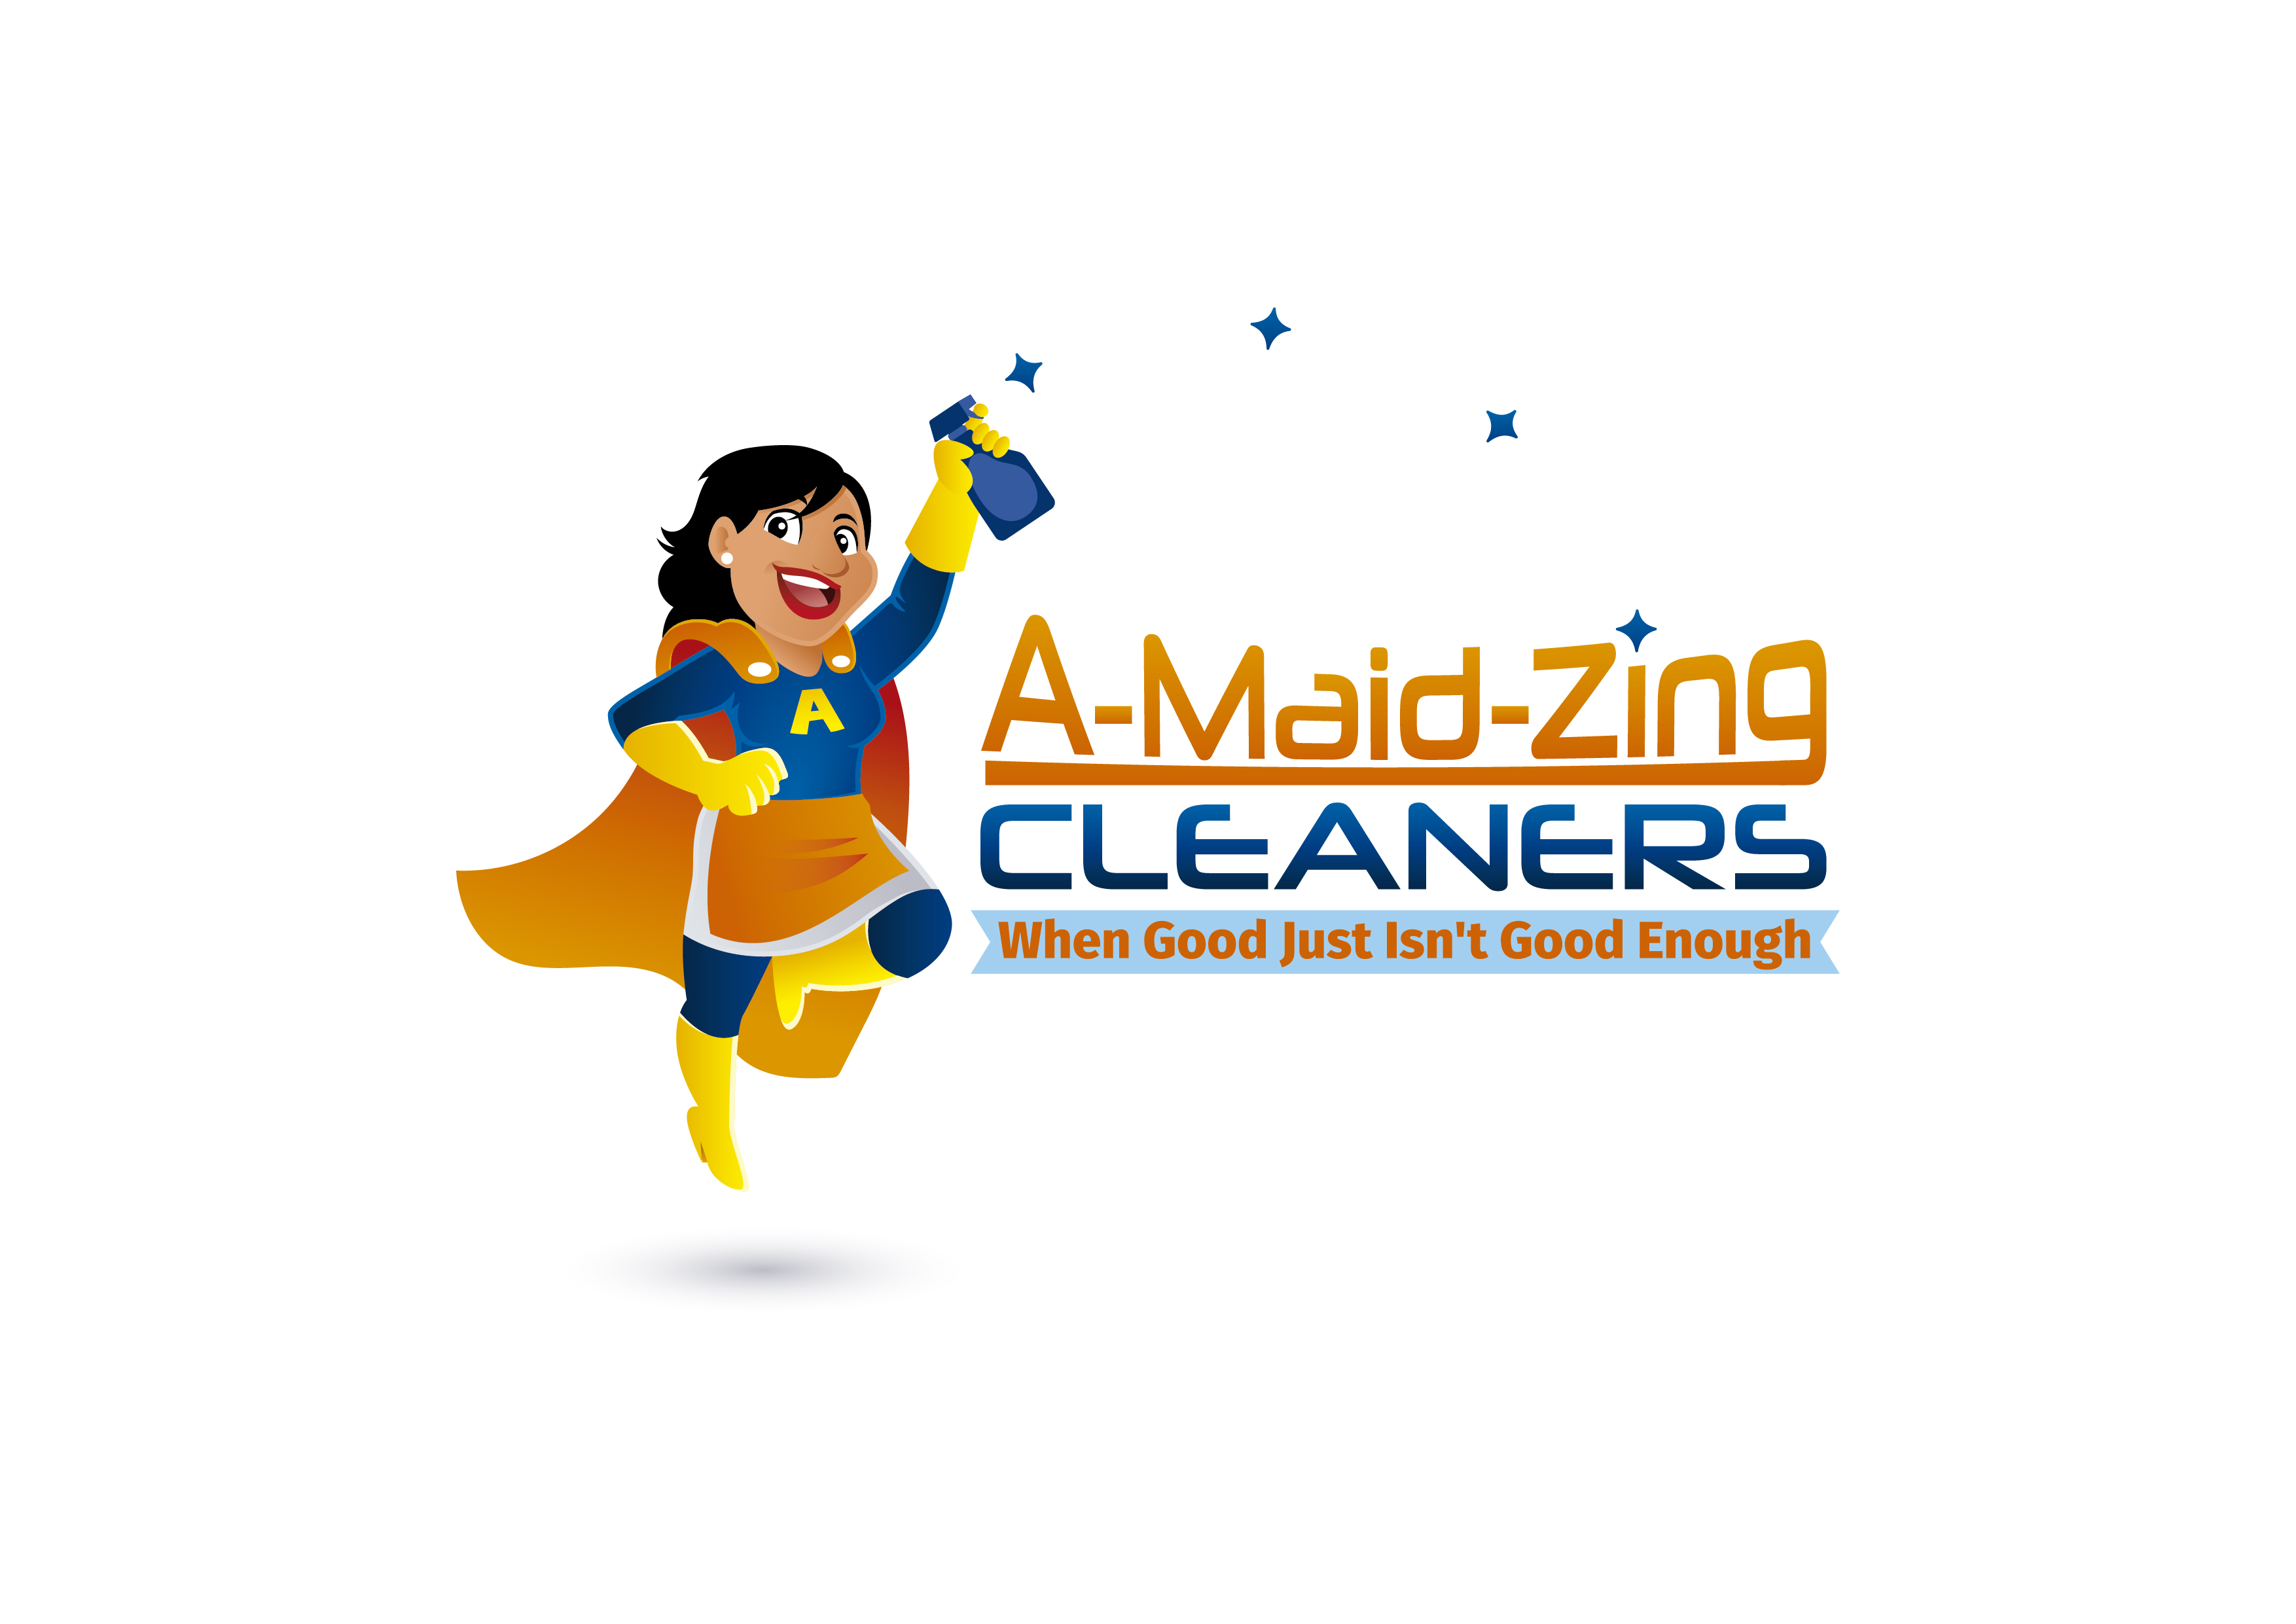 A-Maid-Zing Cleaners